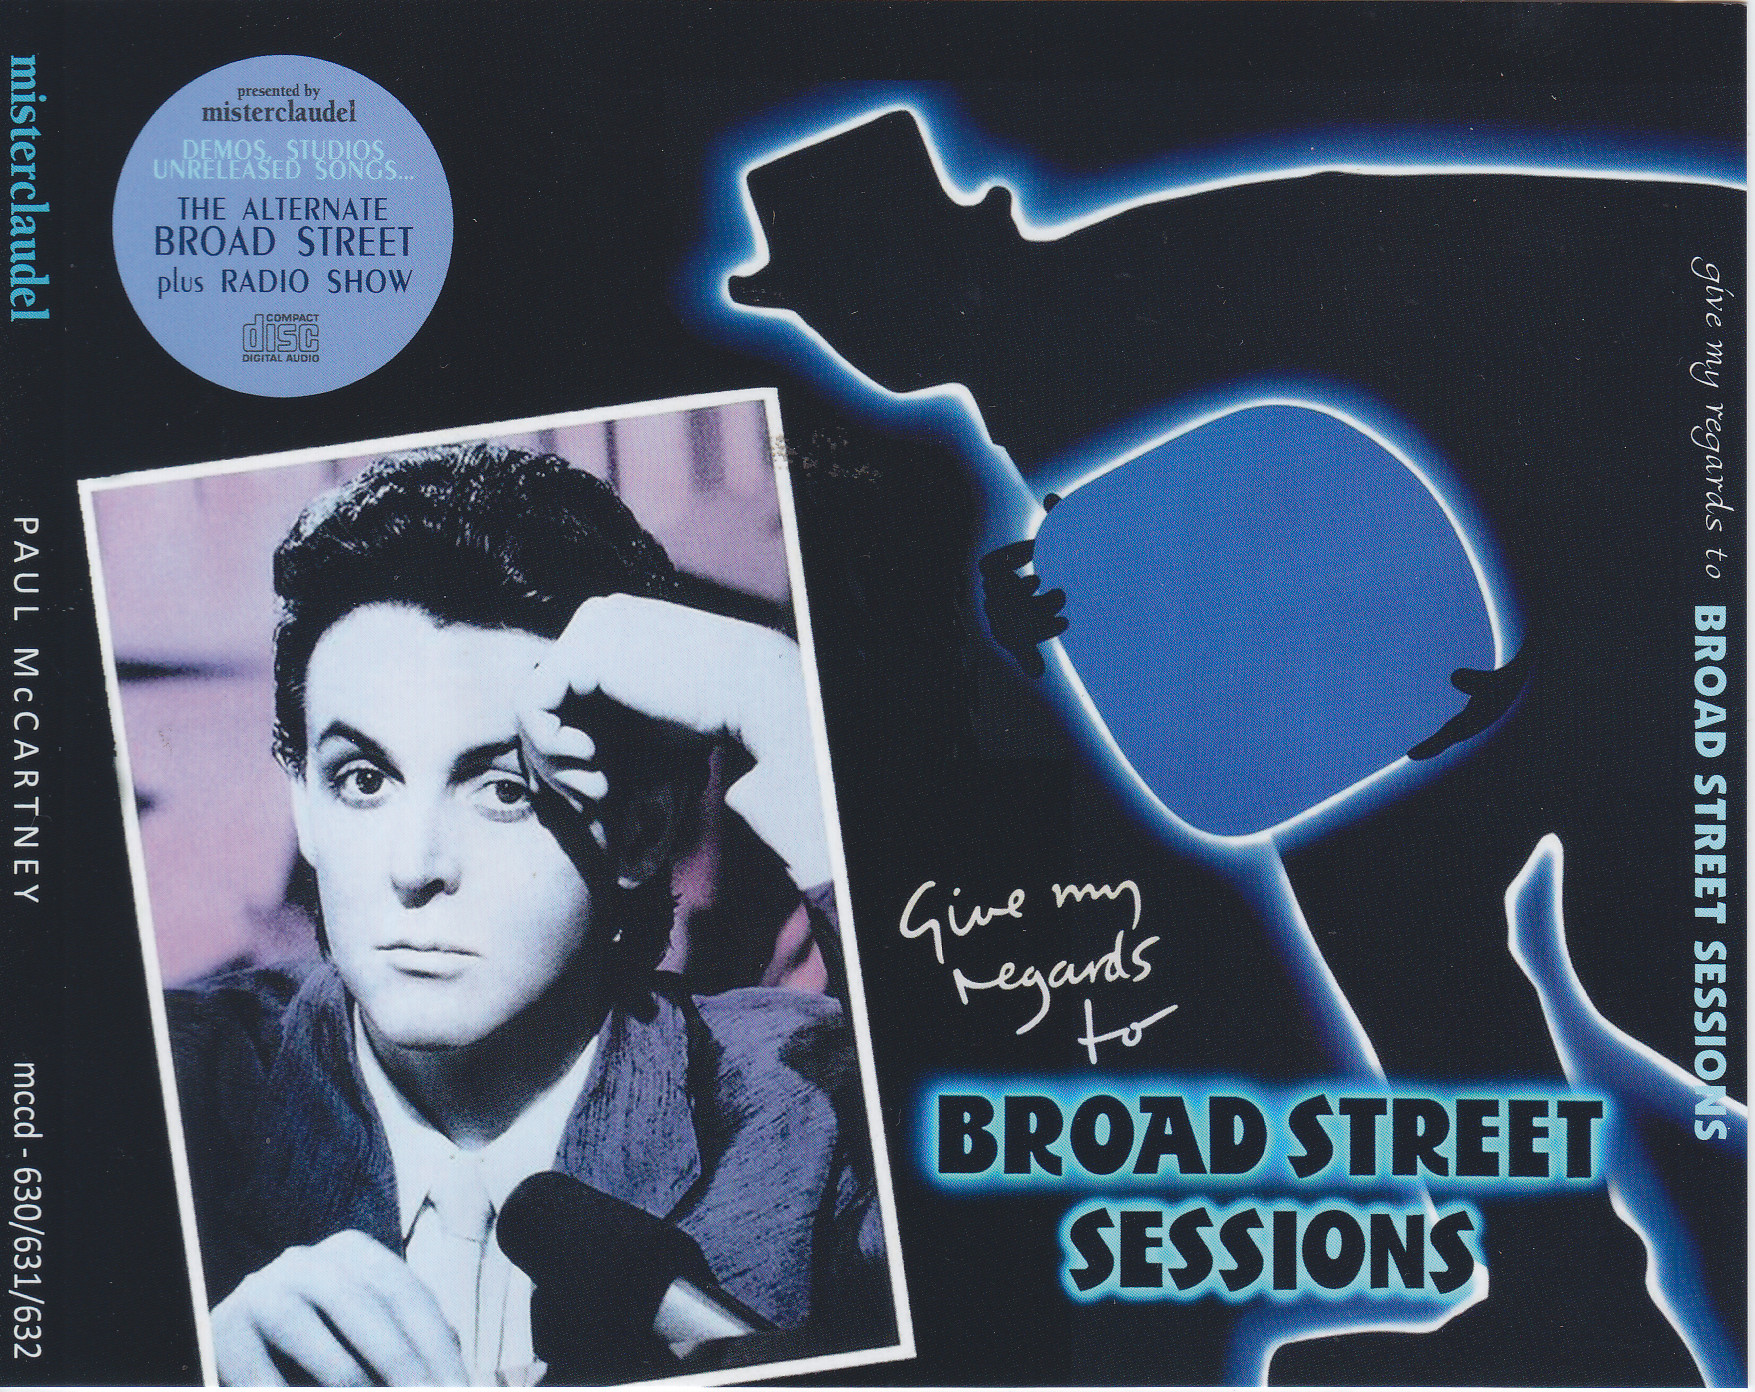 Paul McCartney / Give My Regards To Broad Street Sessions / 3CD